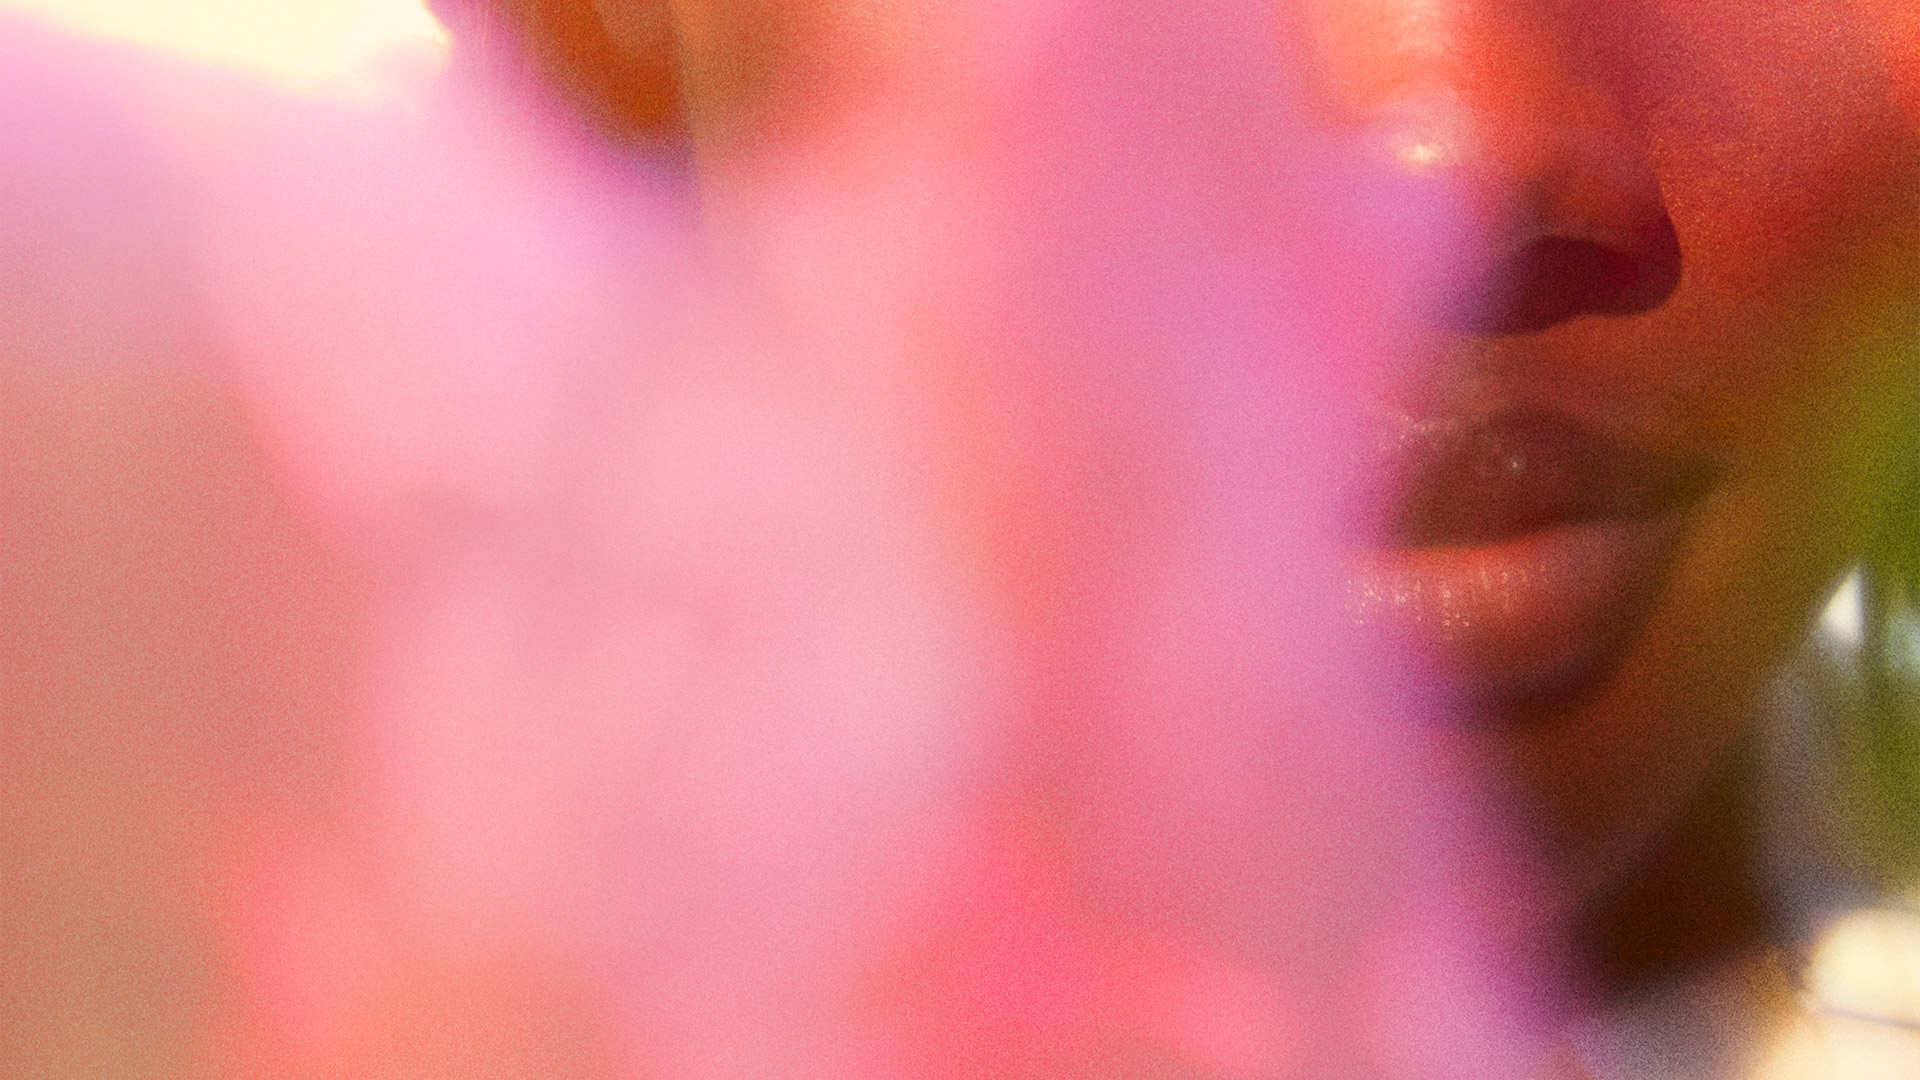 Pink flower blurred over woman's face close up